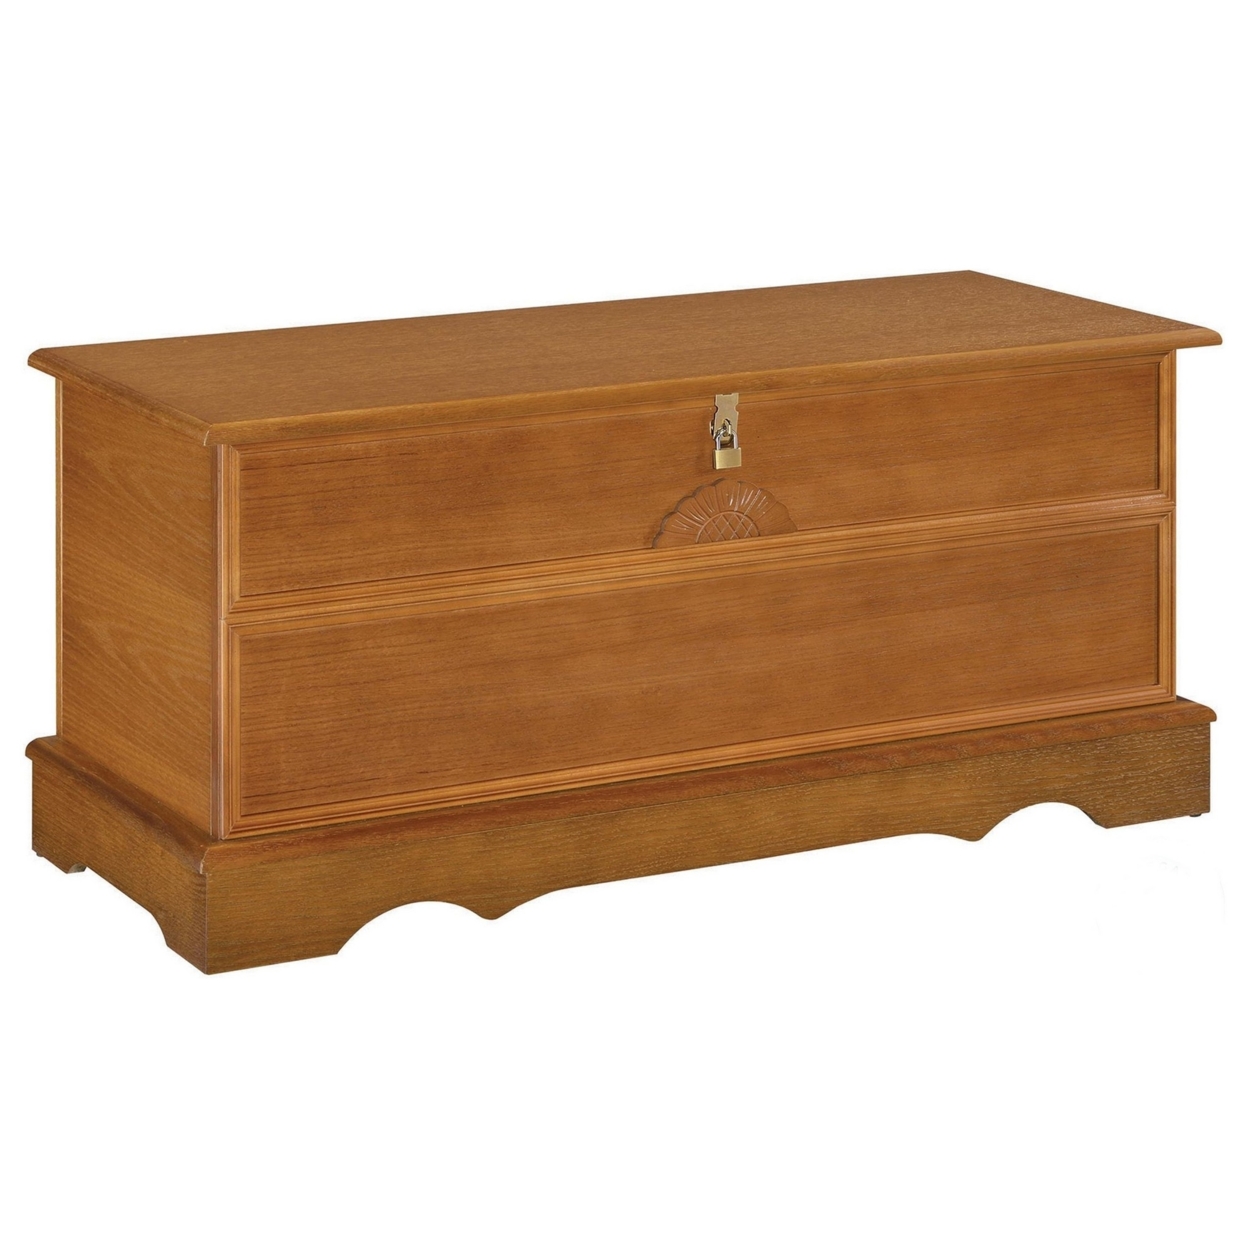 Chest With Molded Details And Lift Top Hidden Storage, Brown- Saltoro Sherpi